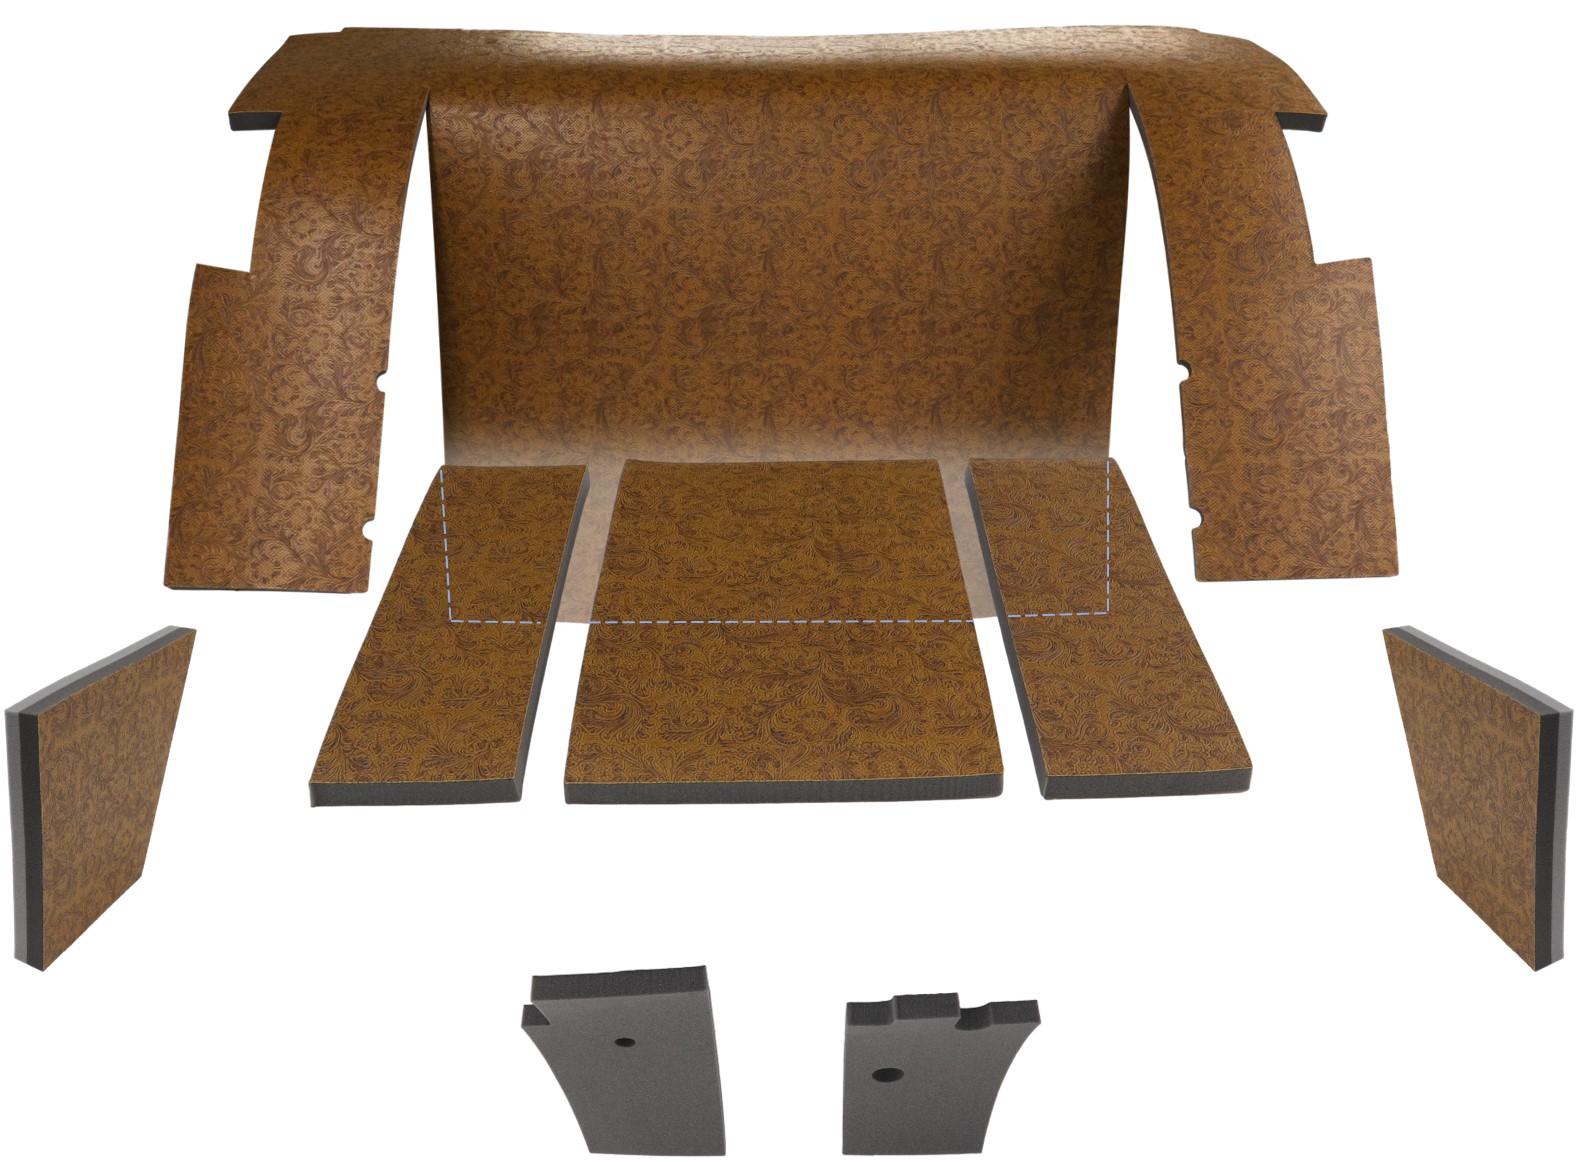 IH 86/3388 LOWER KIT (WESTERN BROWN) Questions & Answers